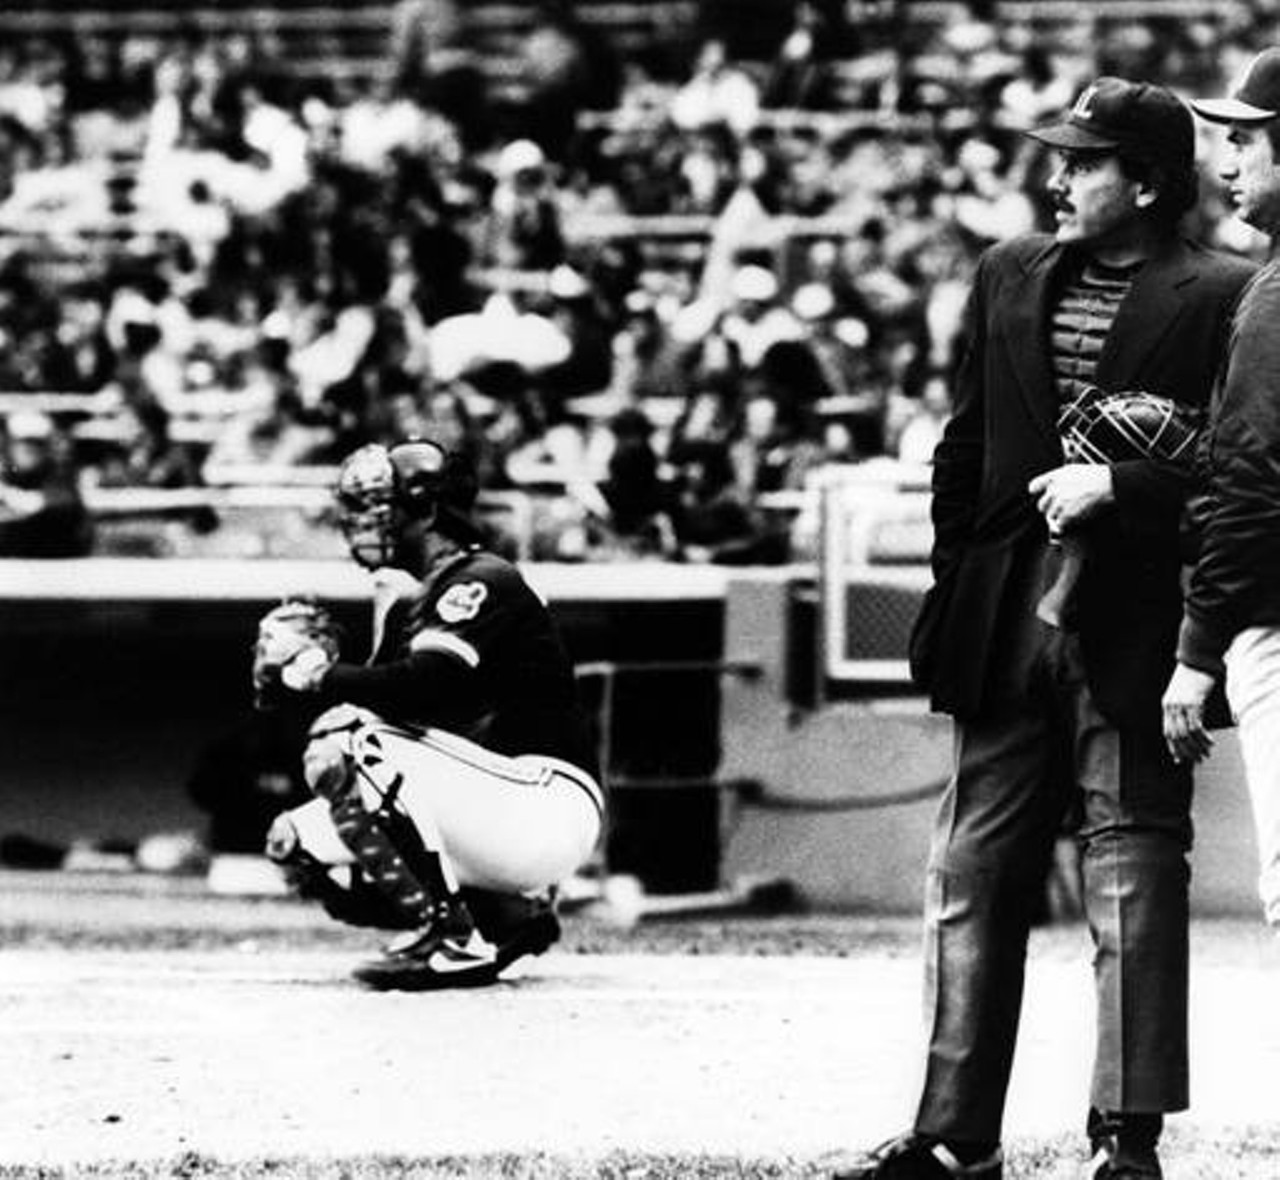 California Angels manager Jim Fregosi (right) talks with umpire Nick Bremigan about field conditions at Cleveland Municpal Stadium. 1981